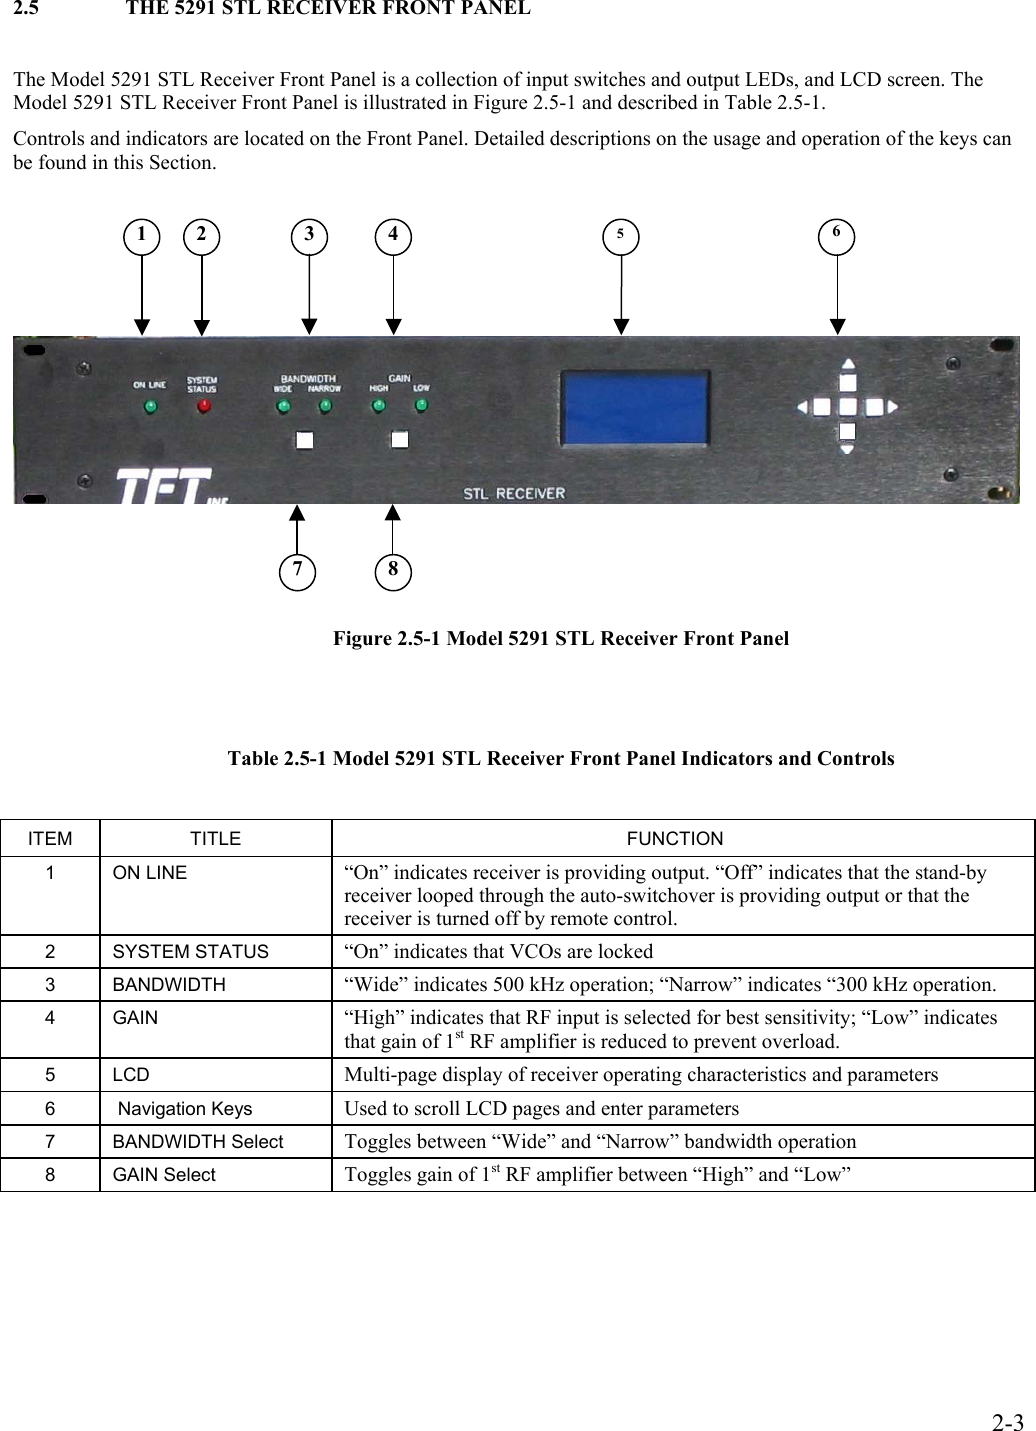  2.5  THE 5291 STL RECEIVER FRONT PANEL  The Model 5291 STL Receiver Front Panel is a collection of input switches and output LEDs, and LCD screen. The Model 5291 STL Receiver Front Panel is illustrated in Figure 2.5-1 and described in Table 2.5-1. Controls and indicators are located on the Front Panel. Detailed descriptions on the usage and operation of the keys can be found in this Section.         1  2  3  4 587 6 Figure 2.5-1 Model 5291 STL Receiver Front Panel   Table 2.5-1 Model 5291 STL Receiver Front Panel Indicators and Controls  ITEM TITLE  FUNCTION 1 ON LINE  “On” indicates receiver is providing output. “Off” indicates that the stand-by receiver looped through the auto-switchover is providing output or that the receiver is turned off by remote control. 2 SYSTEM STATUS  “On” indicates that VCOs are locked 3 BANDWIDTH  “Wide” indicates 500 kHz operation; “Narrow” indicates “300 kHz operation. 4 GAIN  “High” indicates that RF input is selected for best sensitivity; “Low” indicates that gain of 1st RF amplifier is reduced to prevent overload. 5 LCD  Multi-page display of receiver operating characteristics and parameters 6   Navigation Keys  Used to scroll LCD pages and enter parameters 7 BANDWIDTH Select  Toggles between “Wide” and “Narrow” bandwidth operation 8 GAIN Select  Toggles gain of 1st RF amplifier between “High” and “Low”   2-3